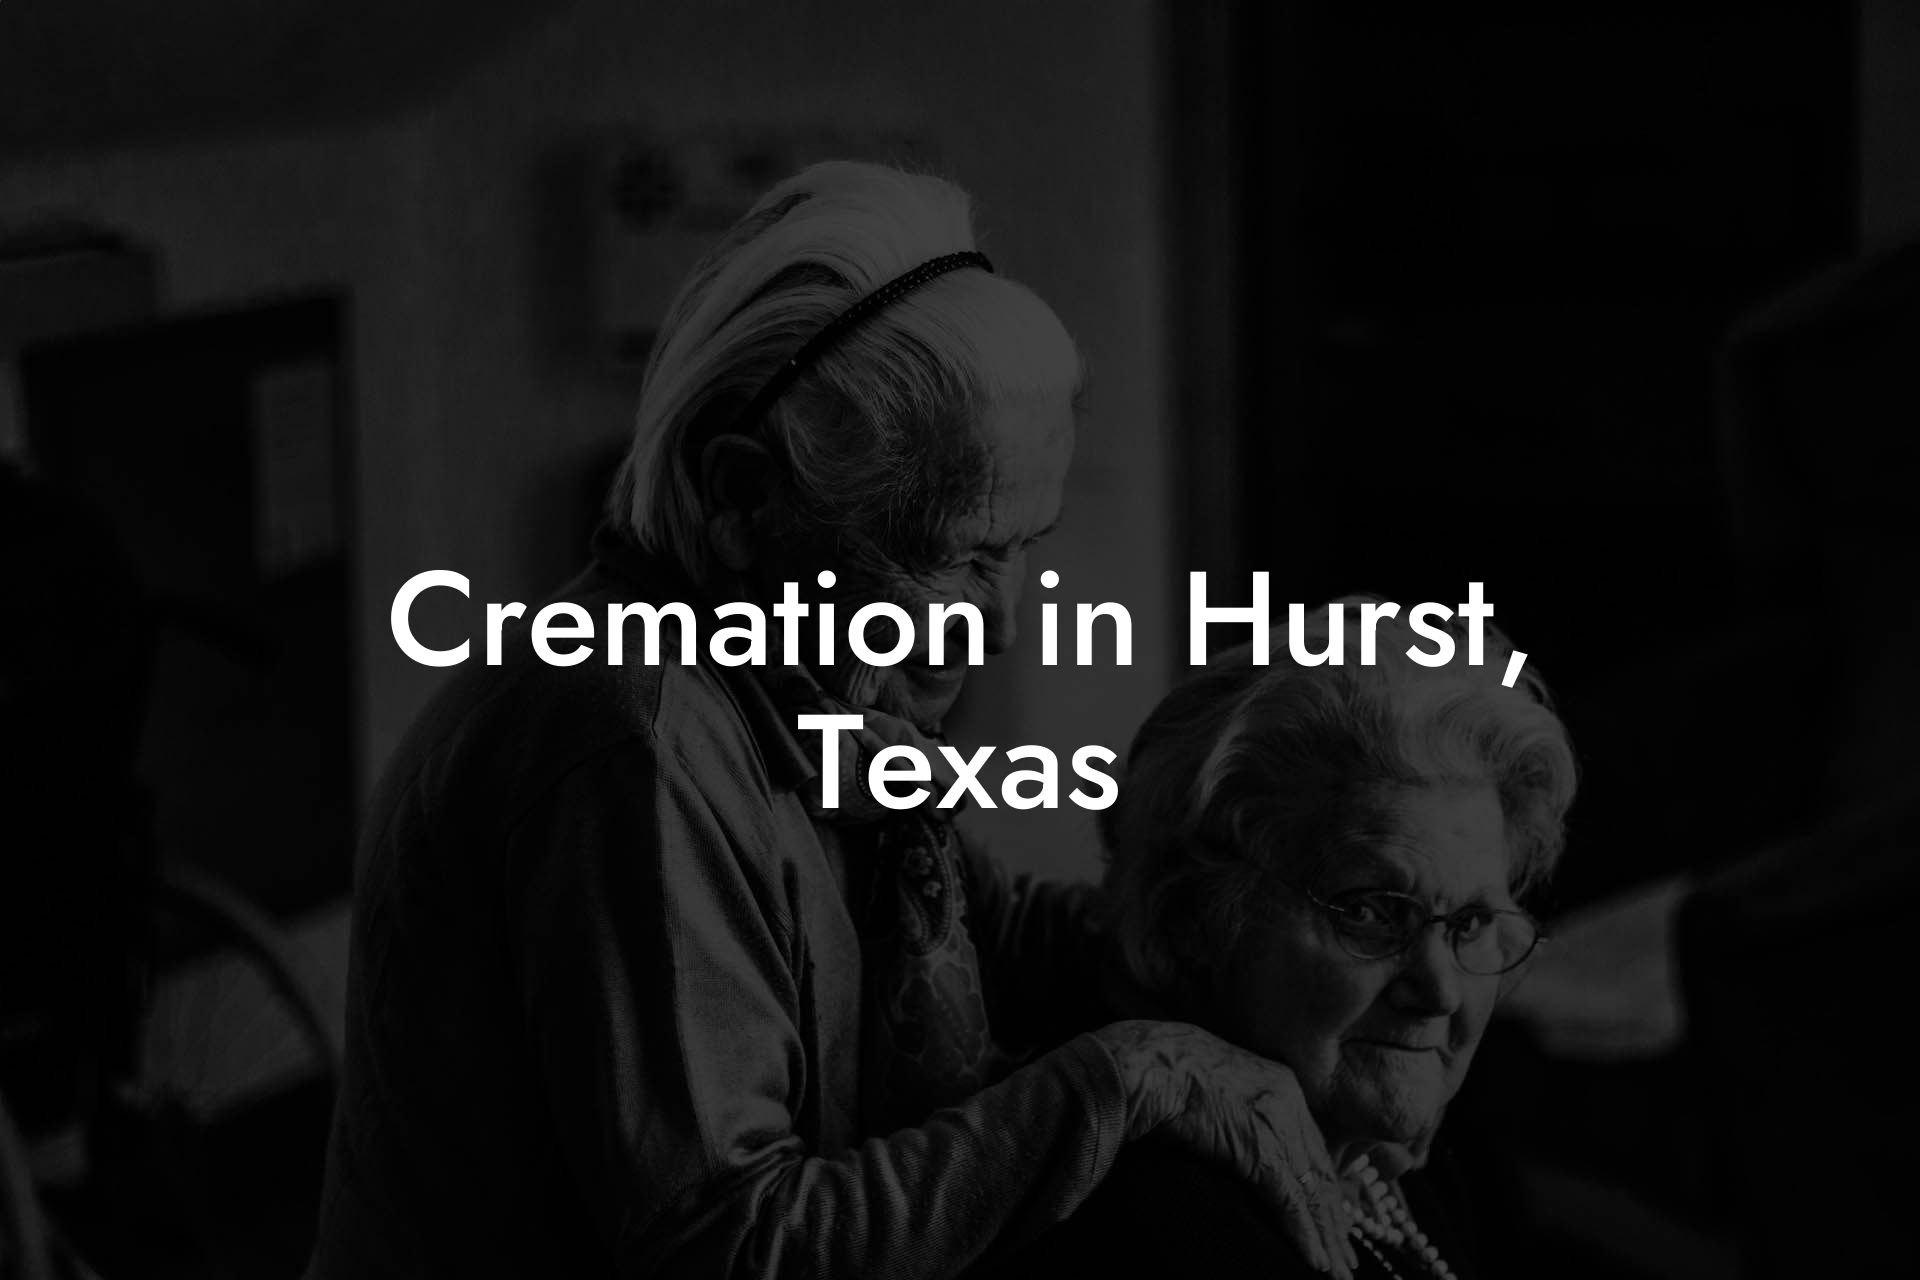 Cremation in Hurst, Texas